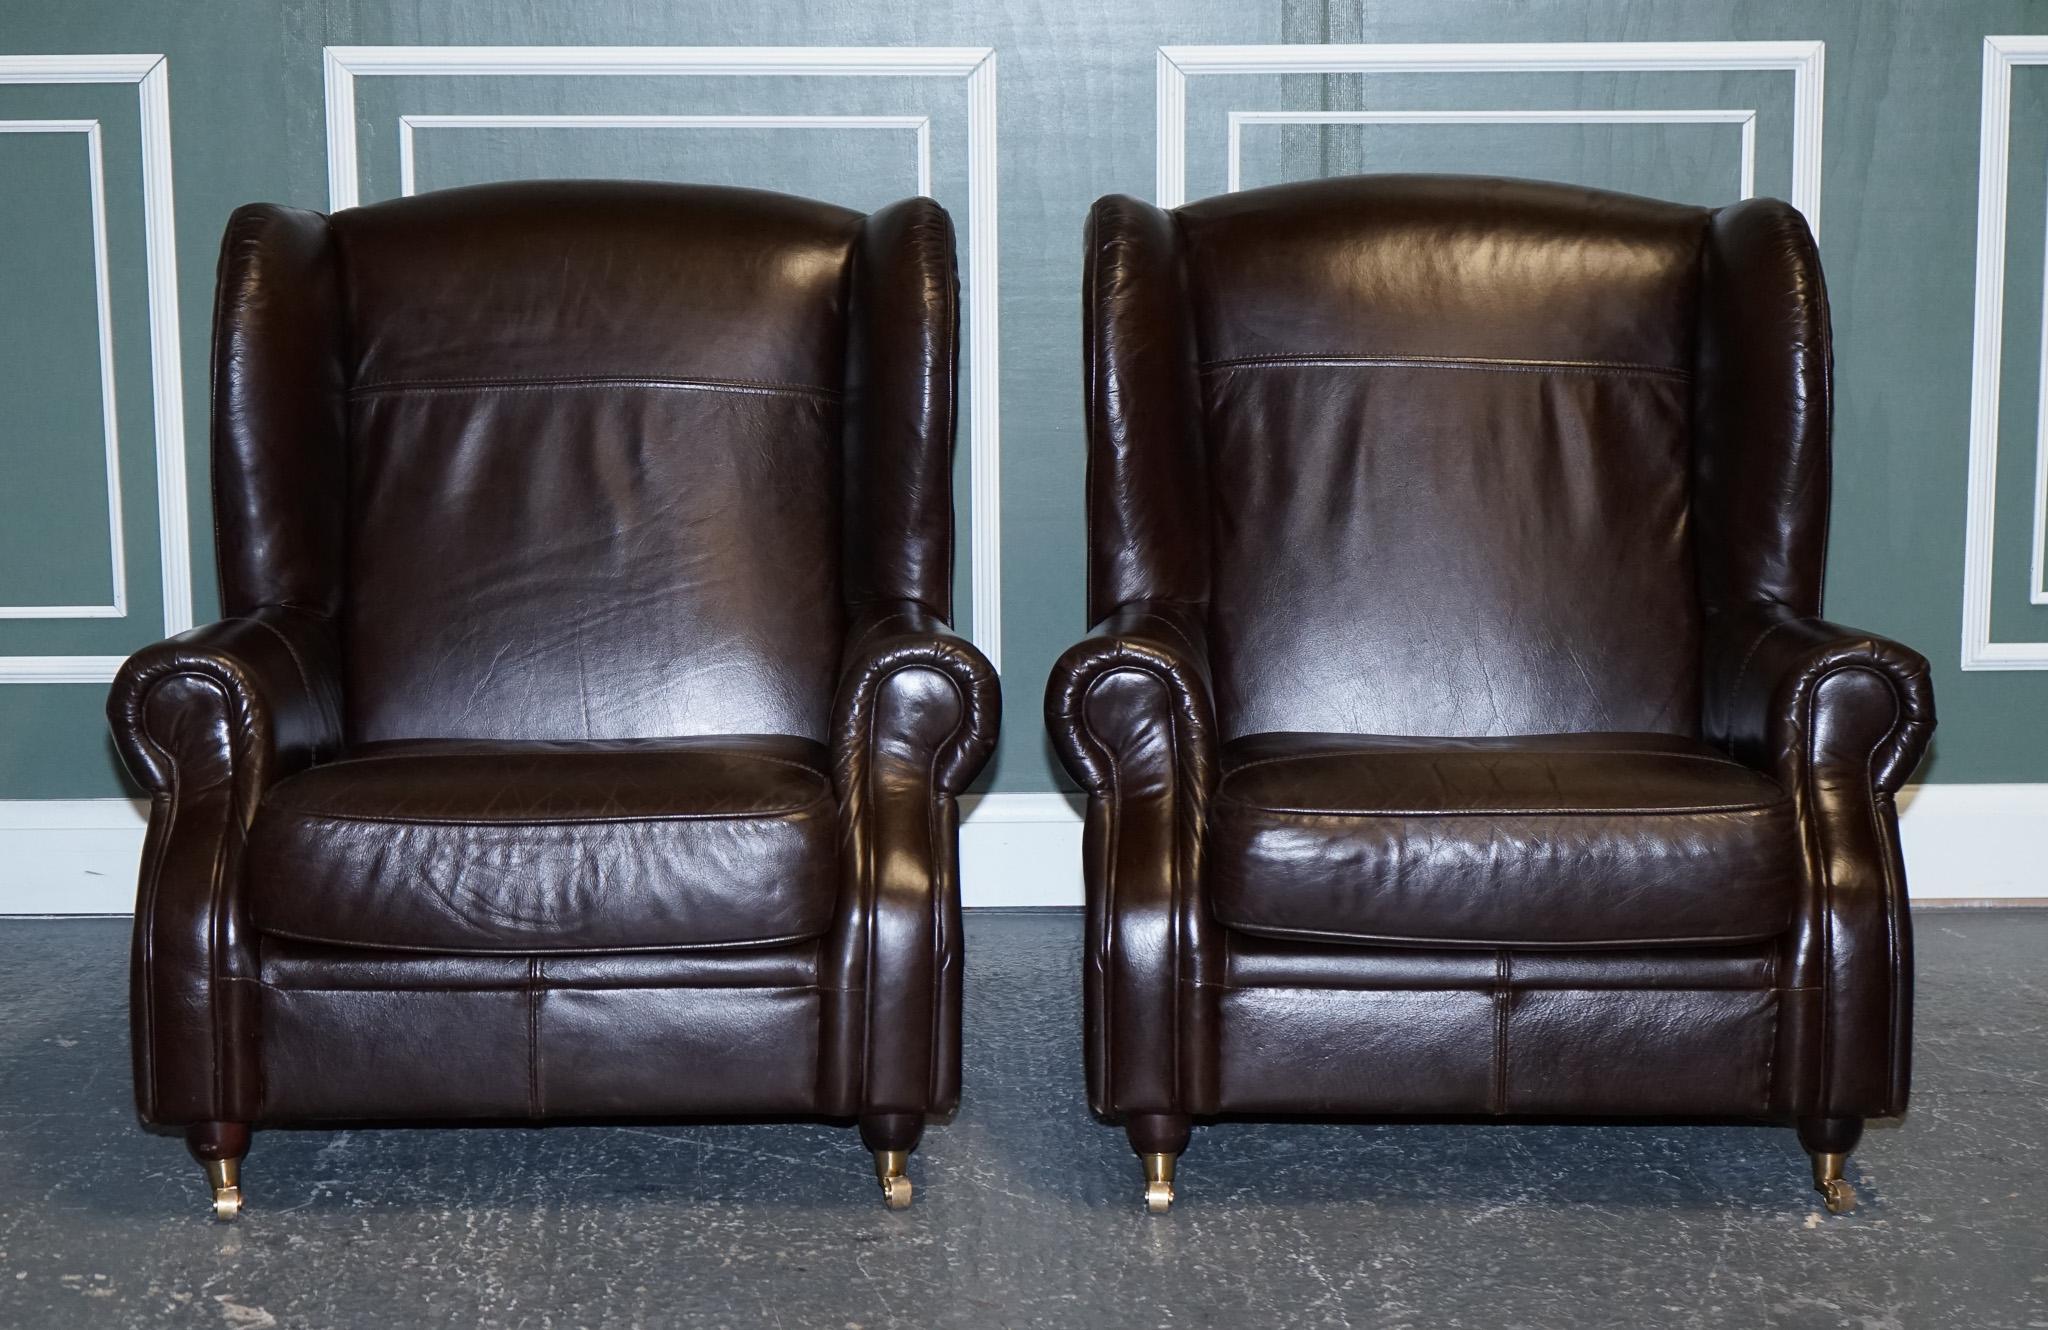 We are excited to present a pair of chocolate brown leather wingback chairs.

Very good-looking pair, in very clean order.
The leather has come back really nice and looks like new.

We have a matching two to three-seater available, please have a